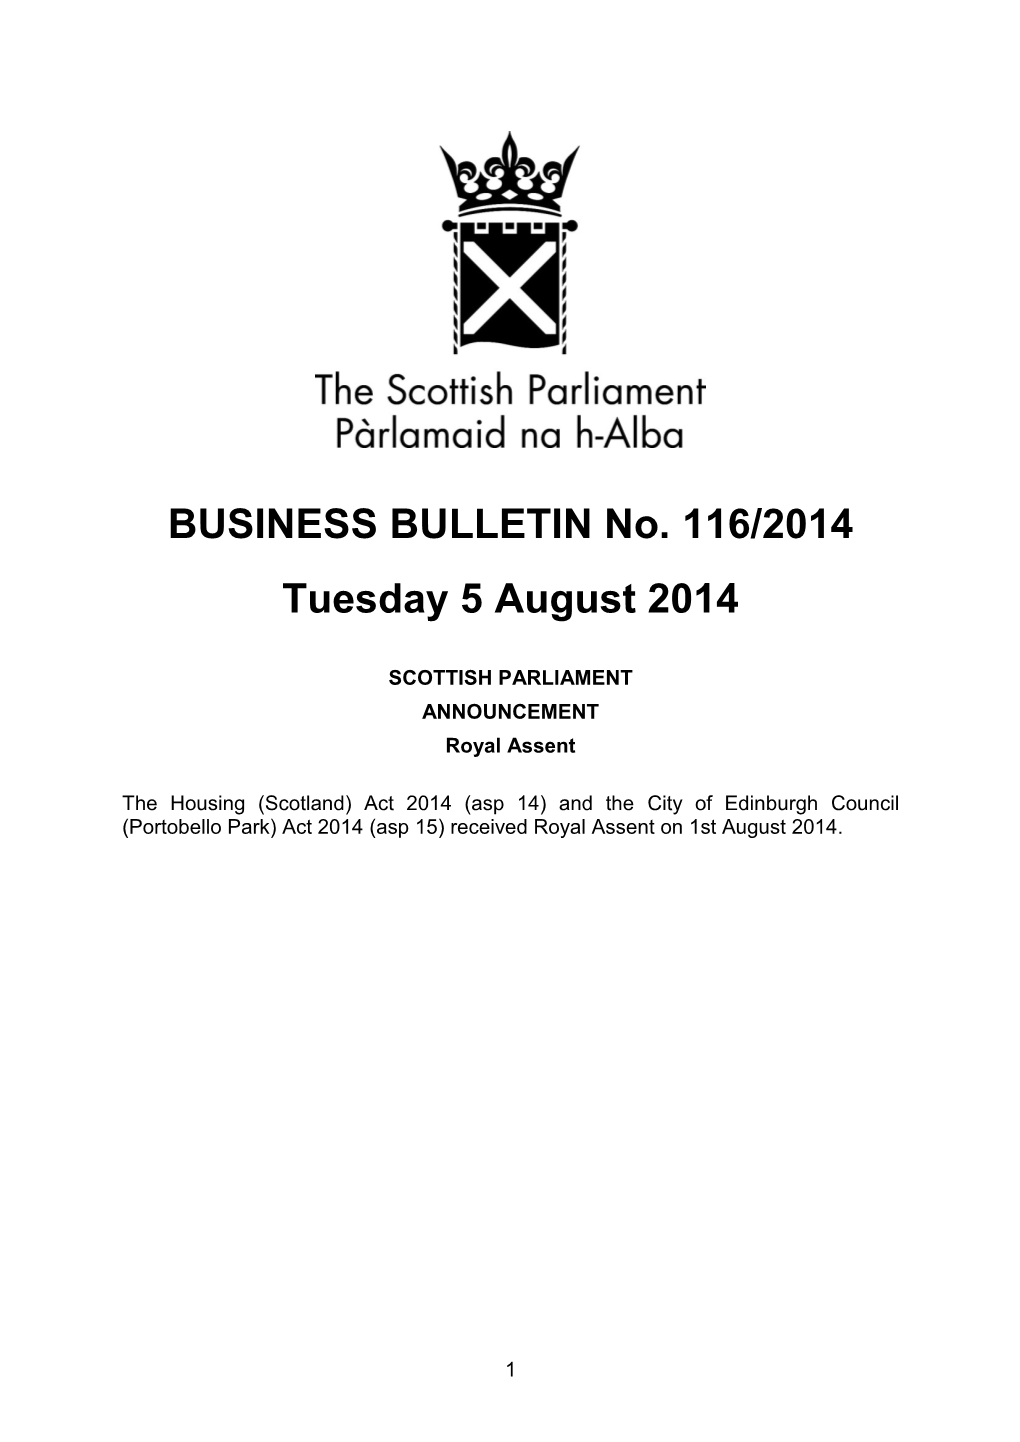 BUSINESS BULLETIN No. 116/2014 Tuesday 5 August 2014